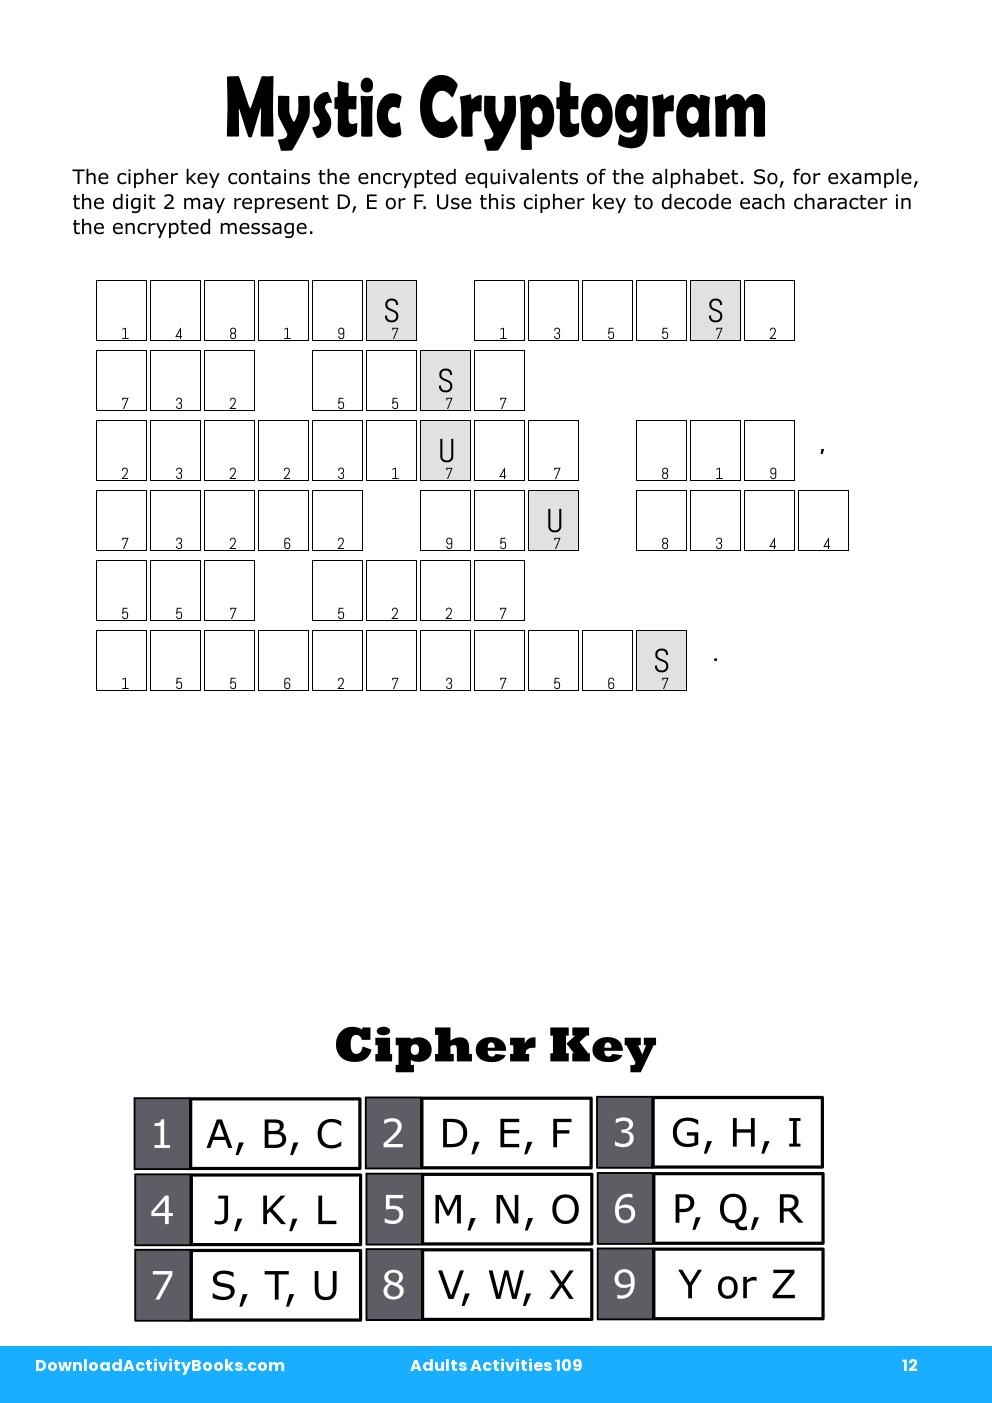 Mystic Cryptogram in Adults Activities 109